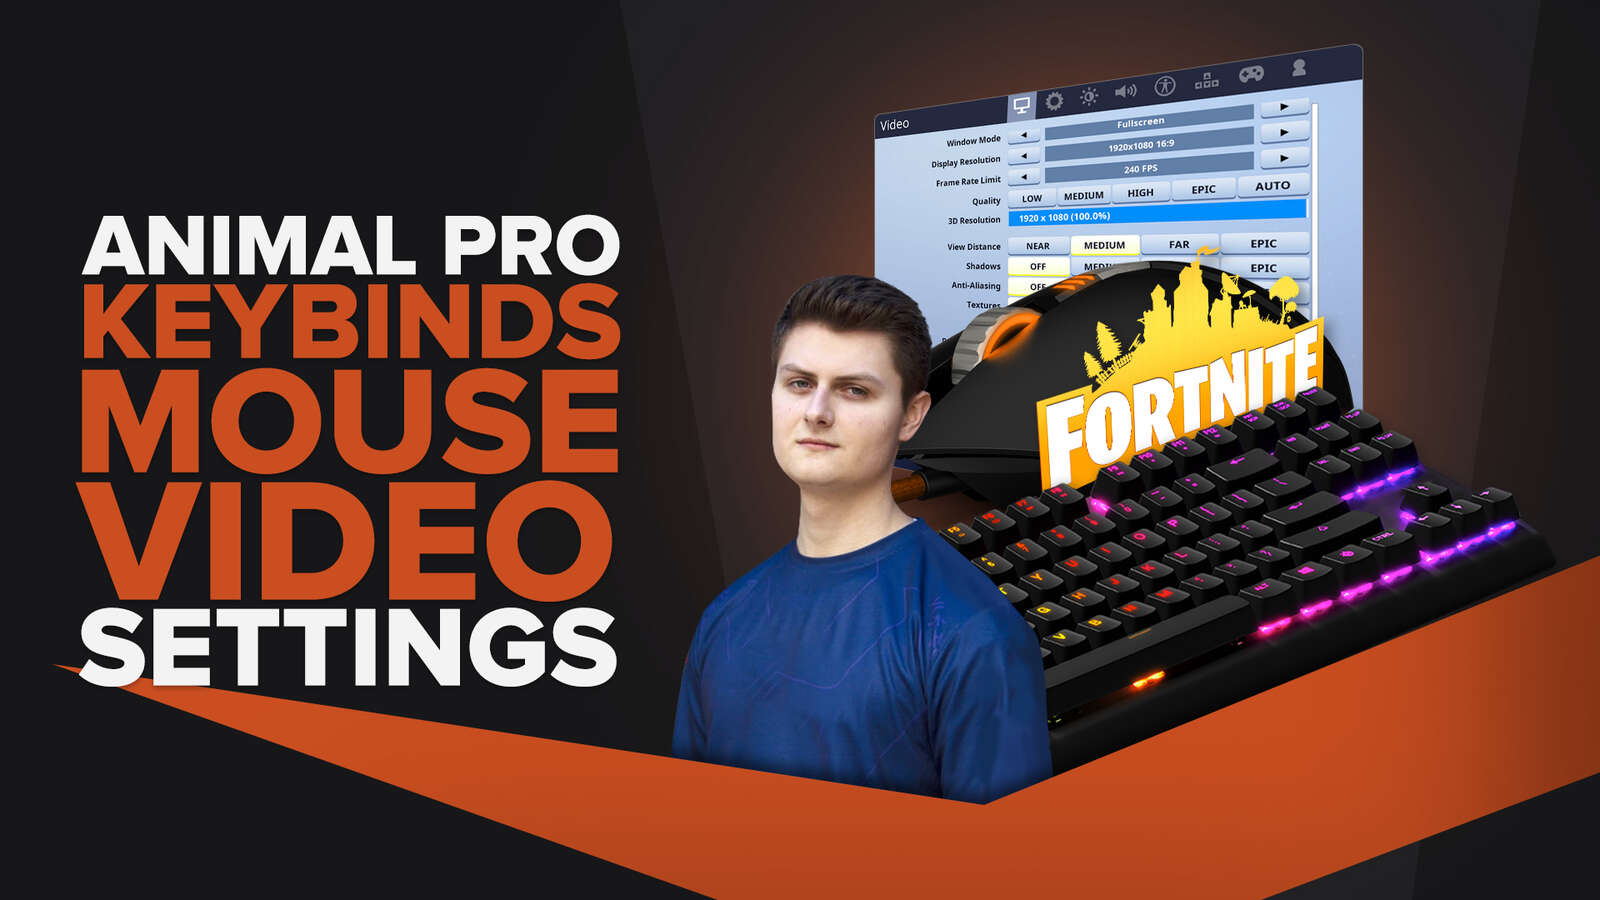 Animal | Keybinds, Mouse, Video Pro Fornite Settings